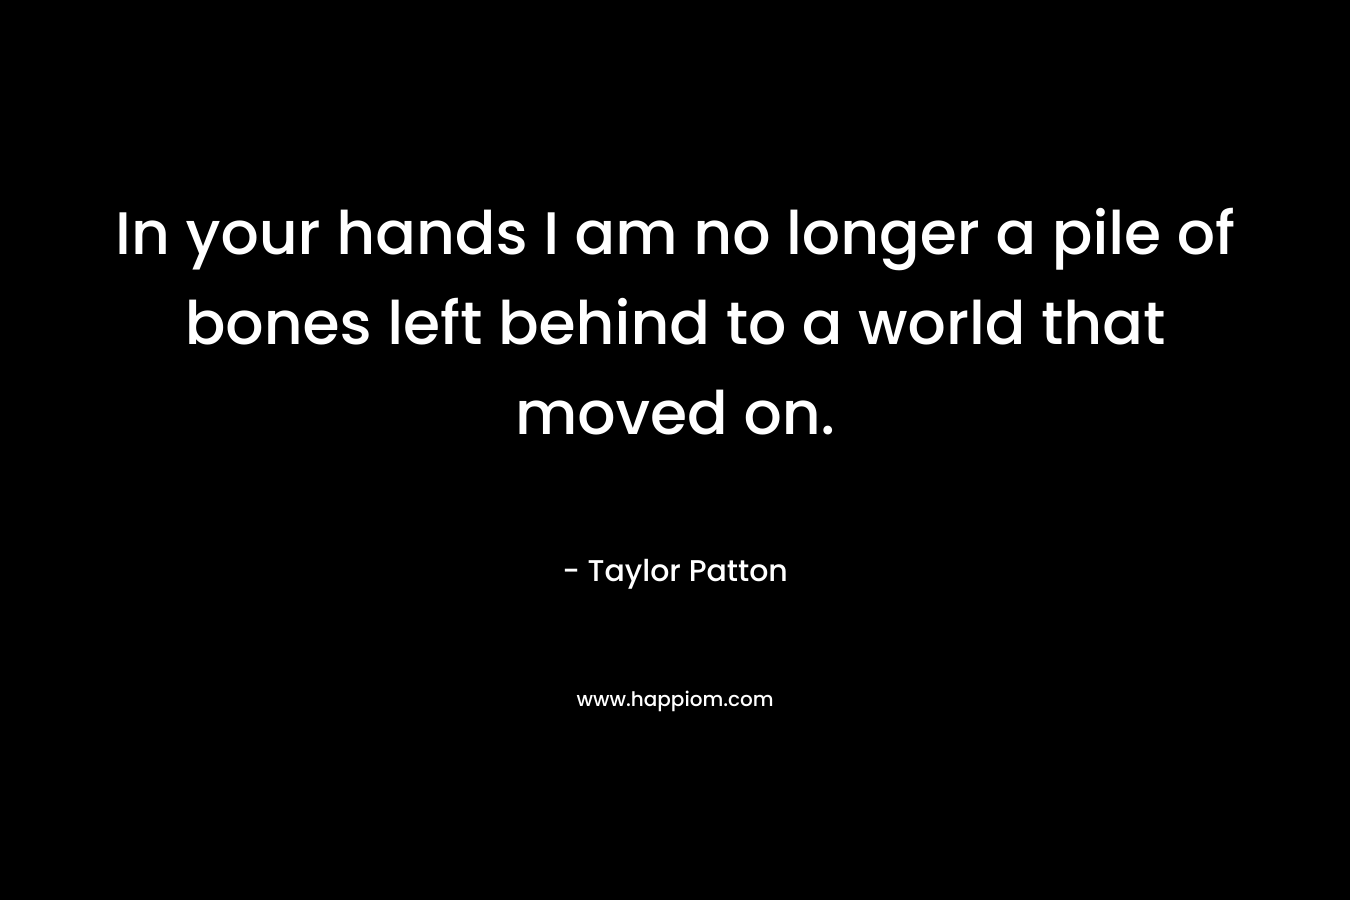 In your hands I am no longer a pile of bones left behind to a world that moved on. – Taylor Patton